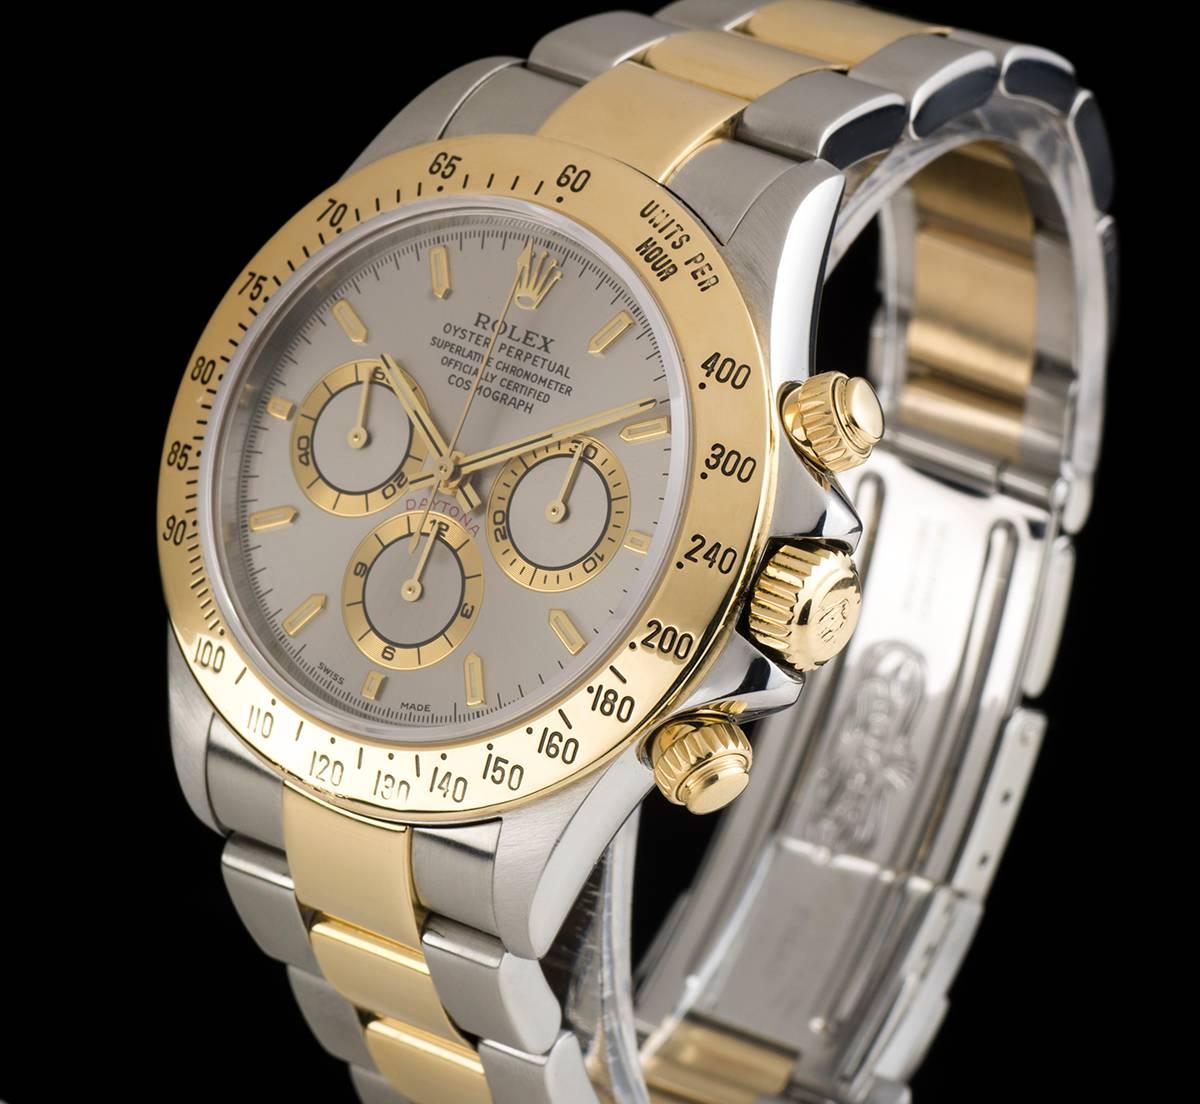 A Stainless Steel and 18k  Zenith Movement Cosmograph Daytona Gents Wristwatch, slate grey dial with applied hour markers, 30 minute recorder at 3 0'clock, 12 hour recorder at 6 0'clock, small seconds at 9 0'clock, a fixed 18k yellow gold tachymetre